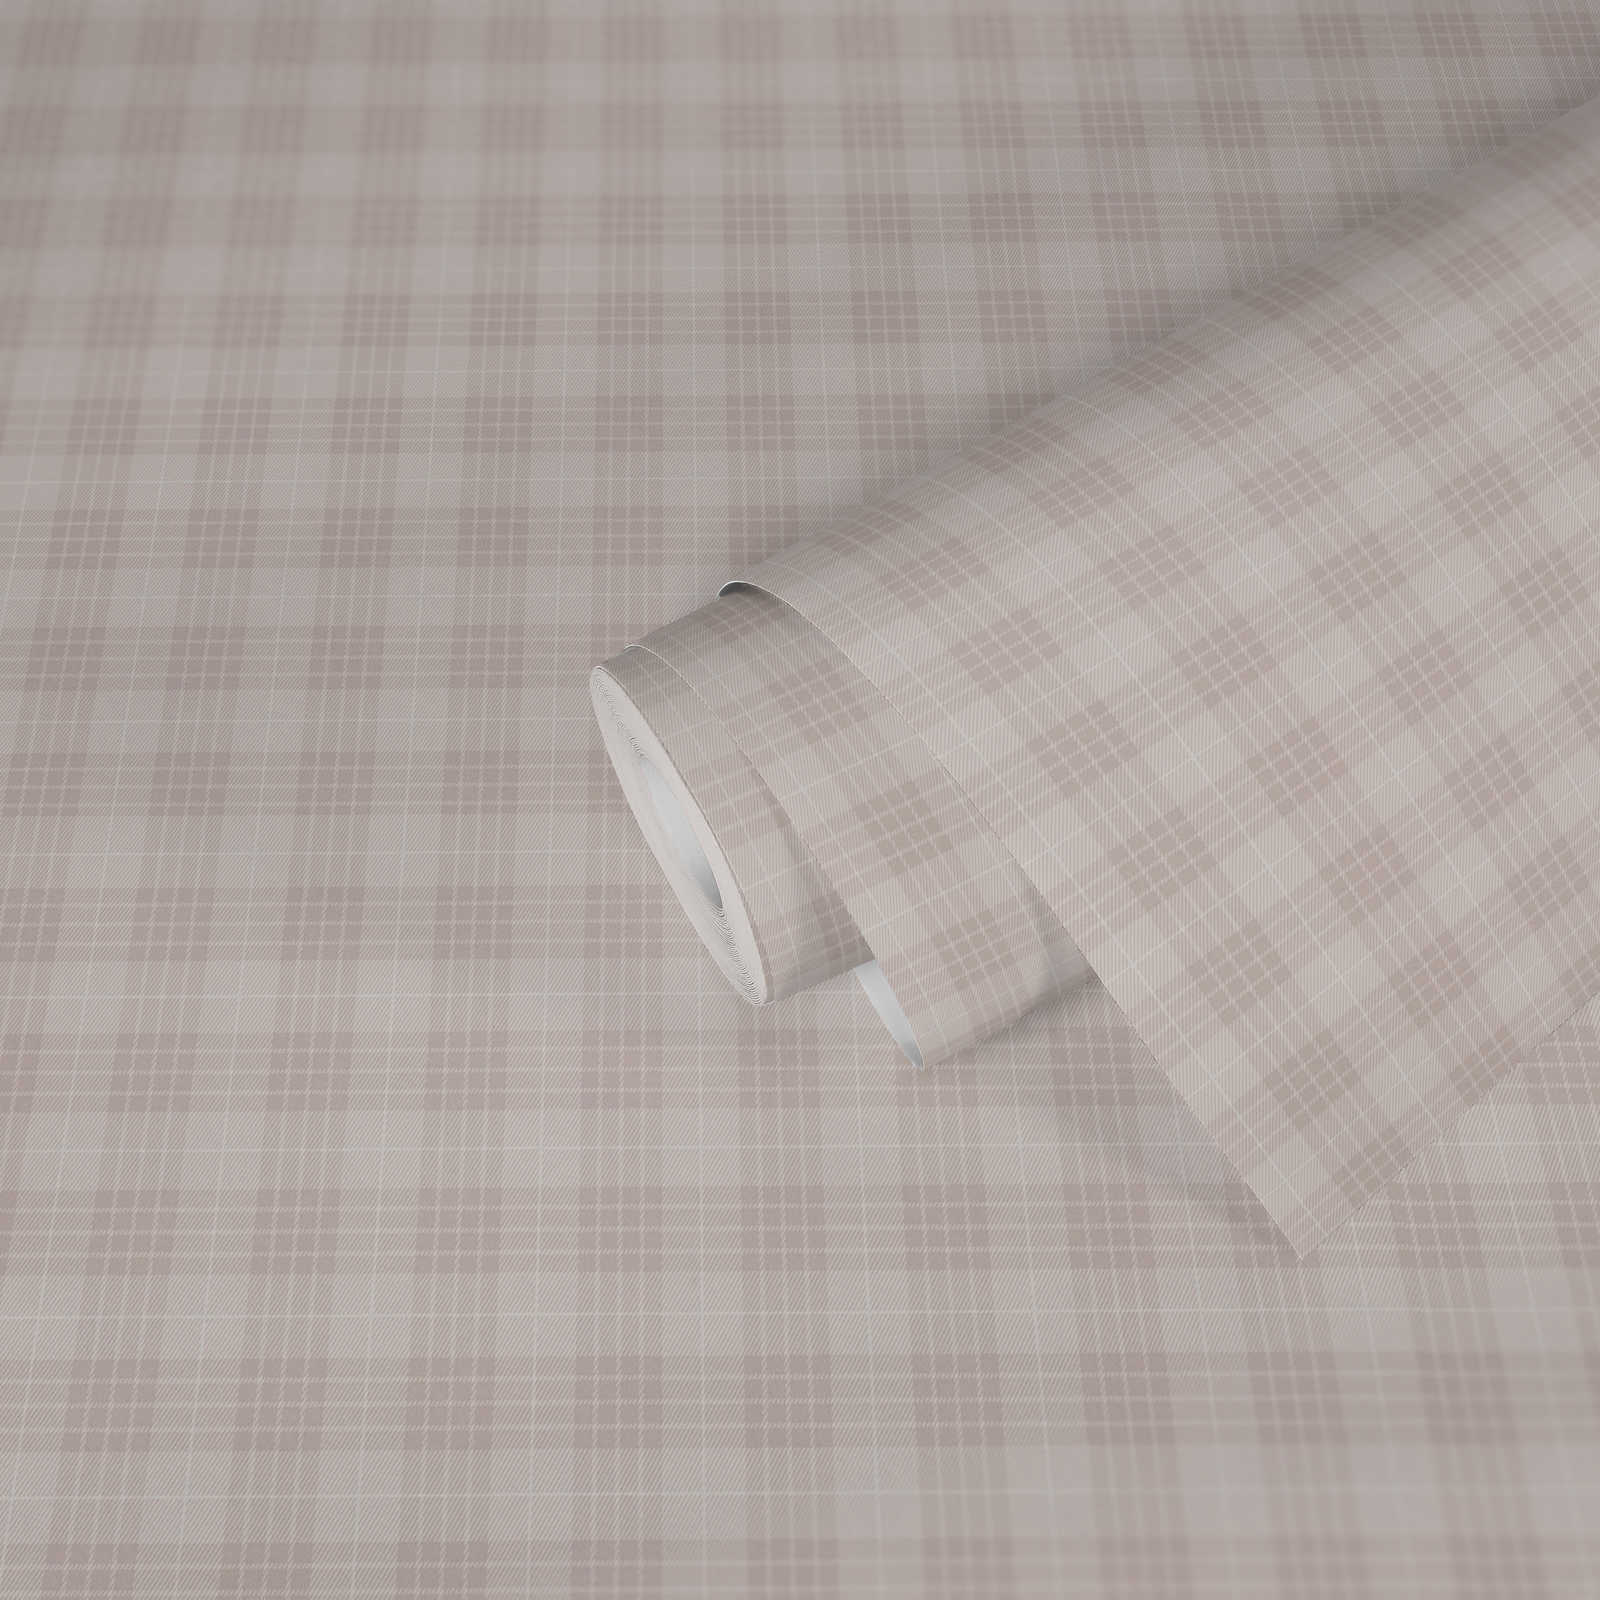             Non-woven wallpaper chequered with flannel fabric look - cream, white
        